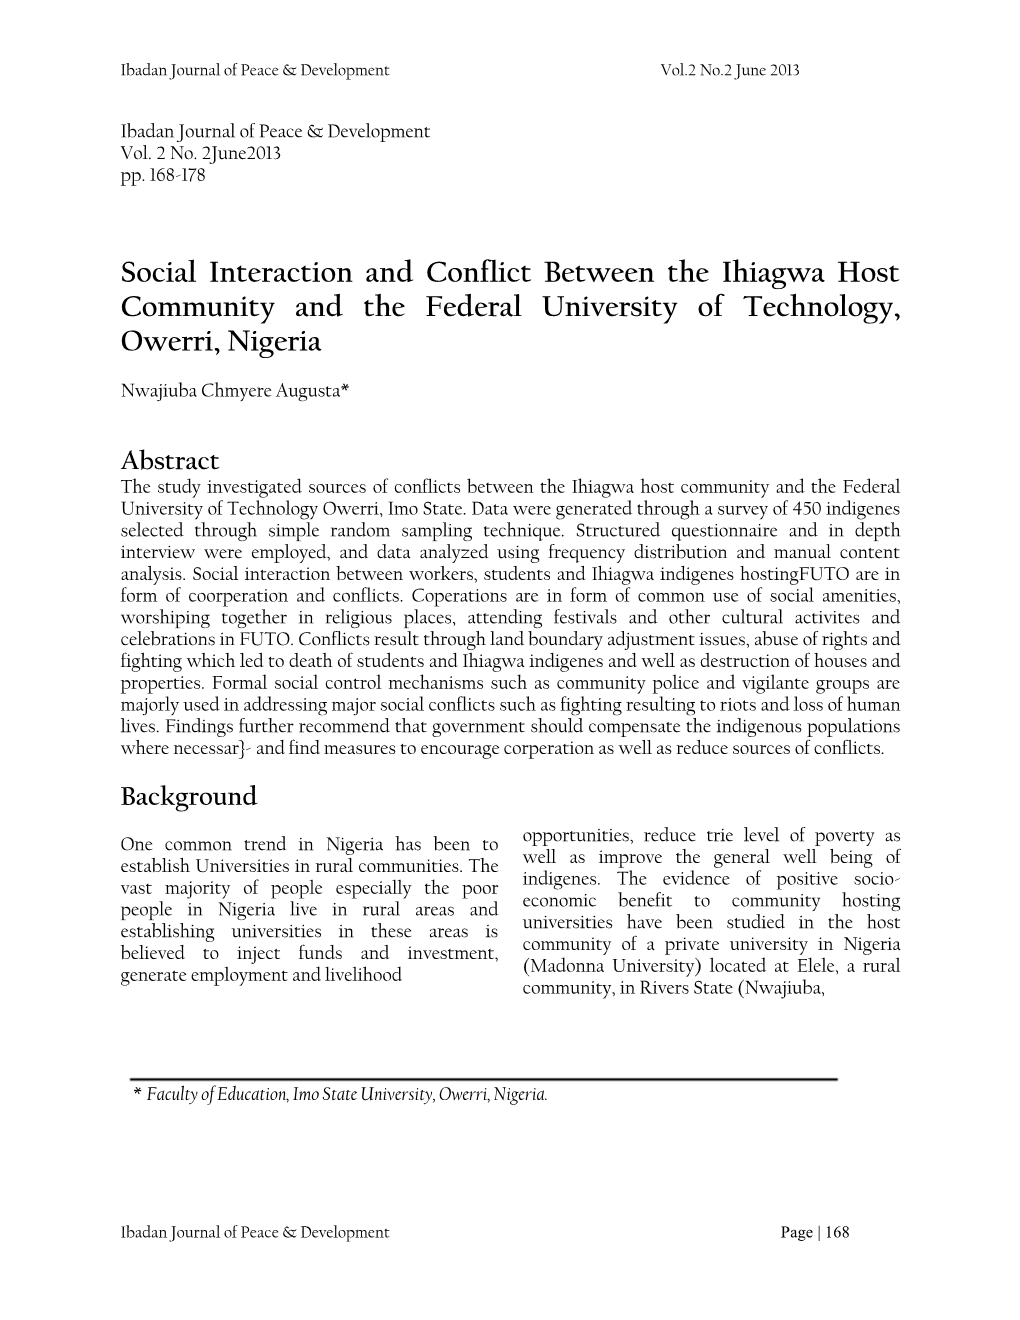 Social Interaction and Conflict Between the Ihiagwa Host Community and the Federal University of Technology, Owerri, Nigeria